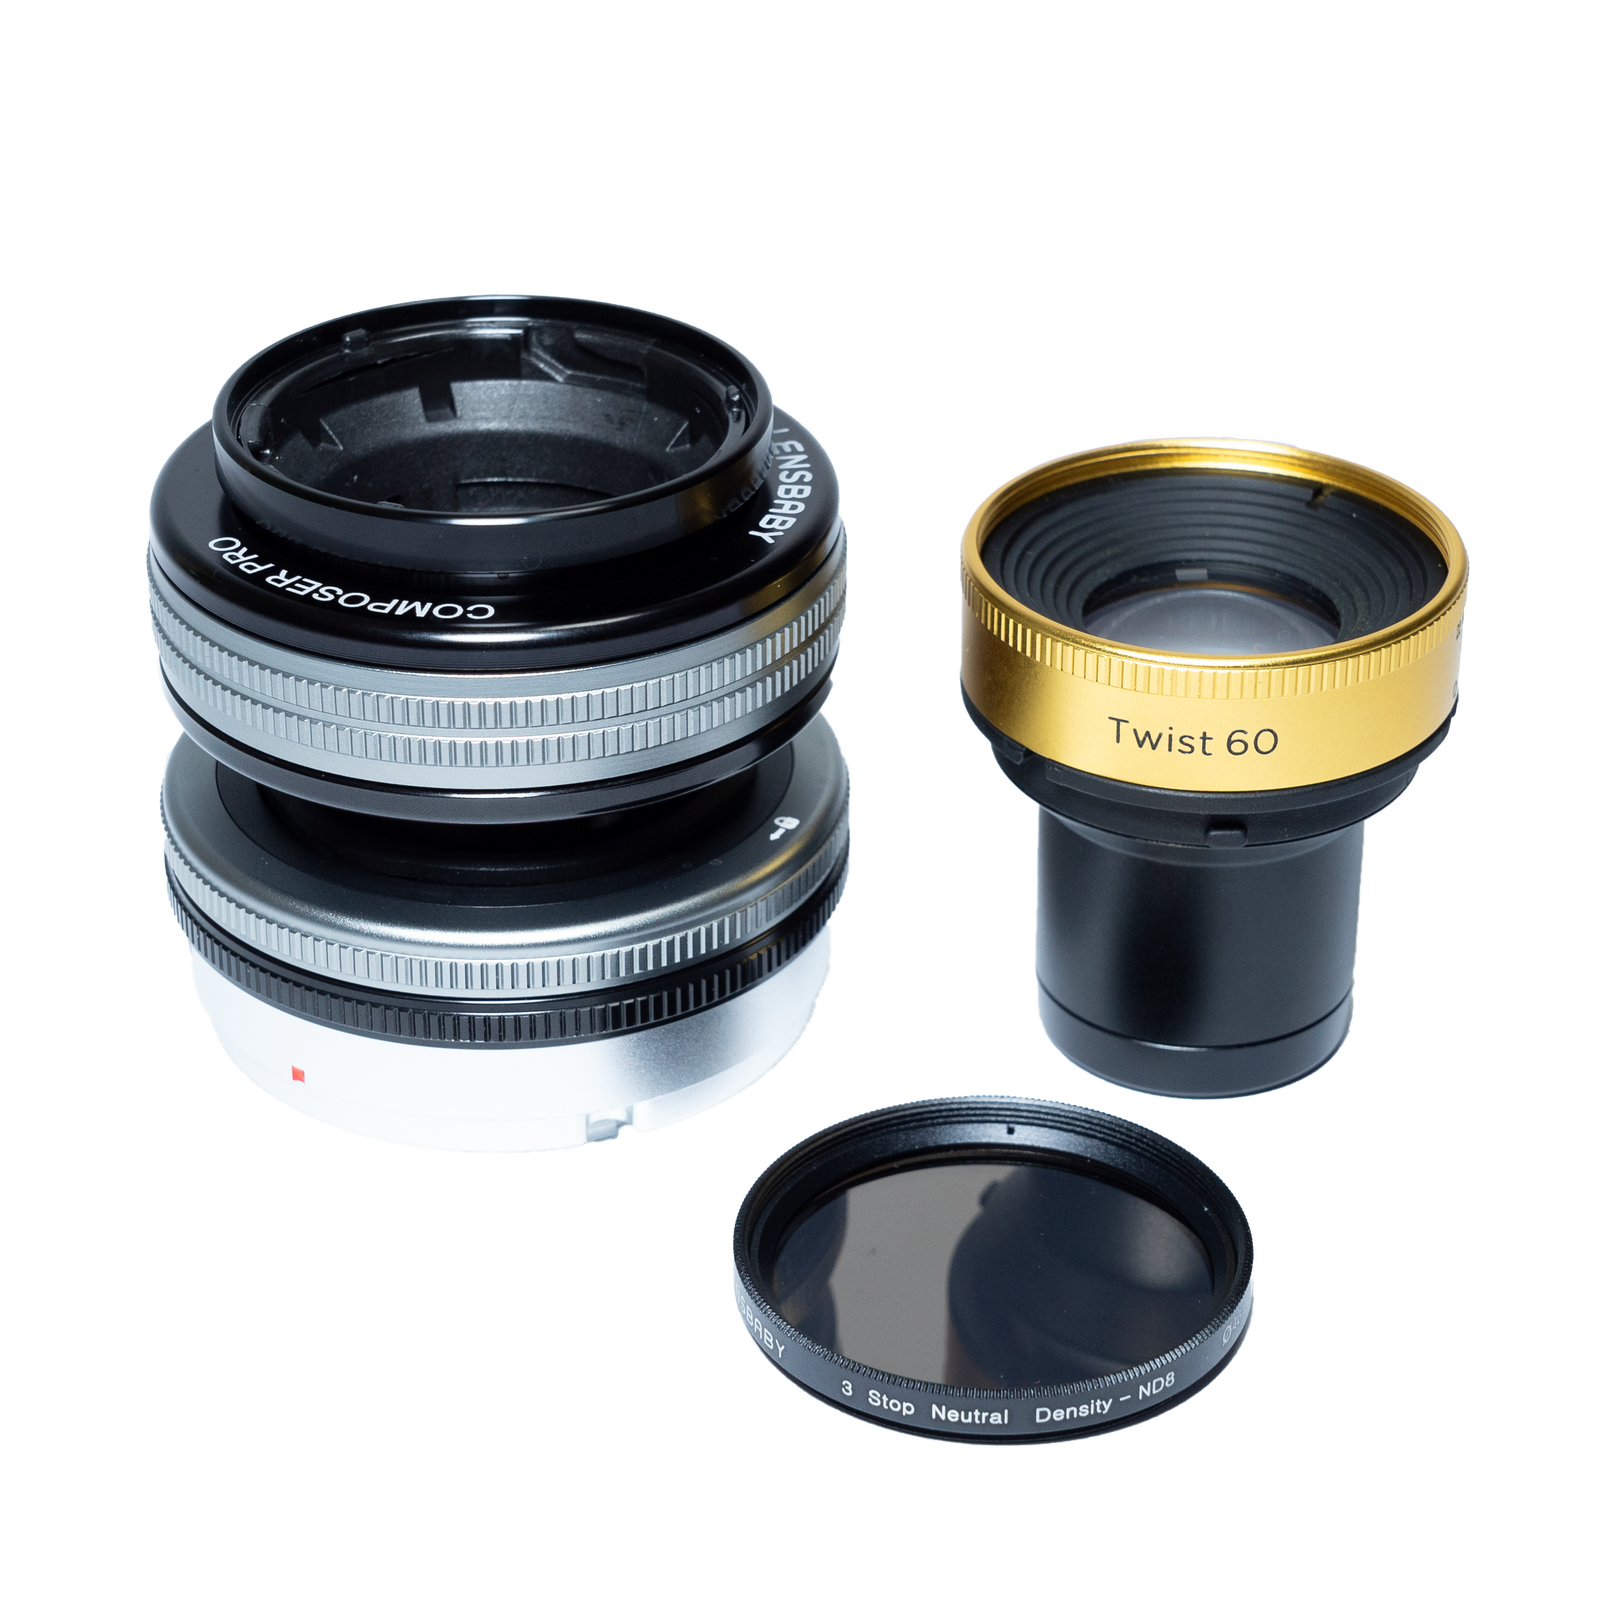 Lensbaby | Camera Lenses For Creative Effects & More